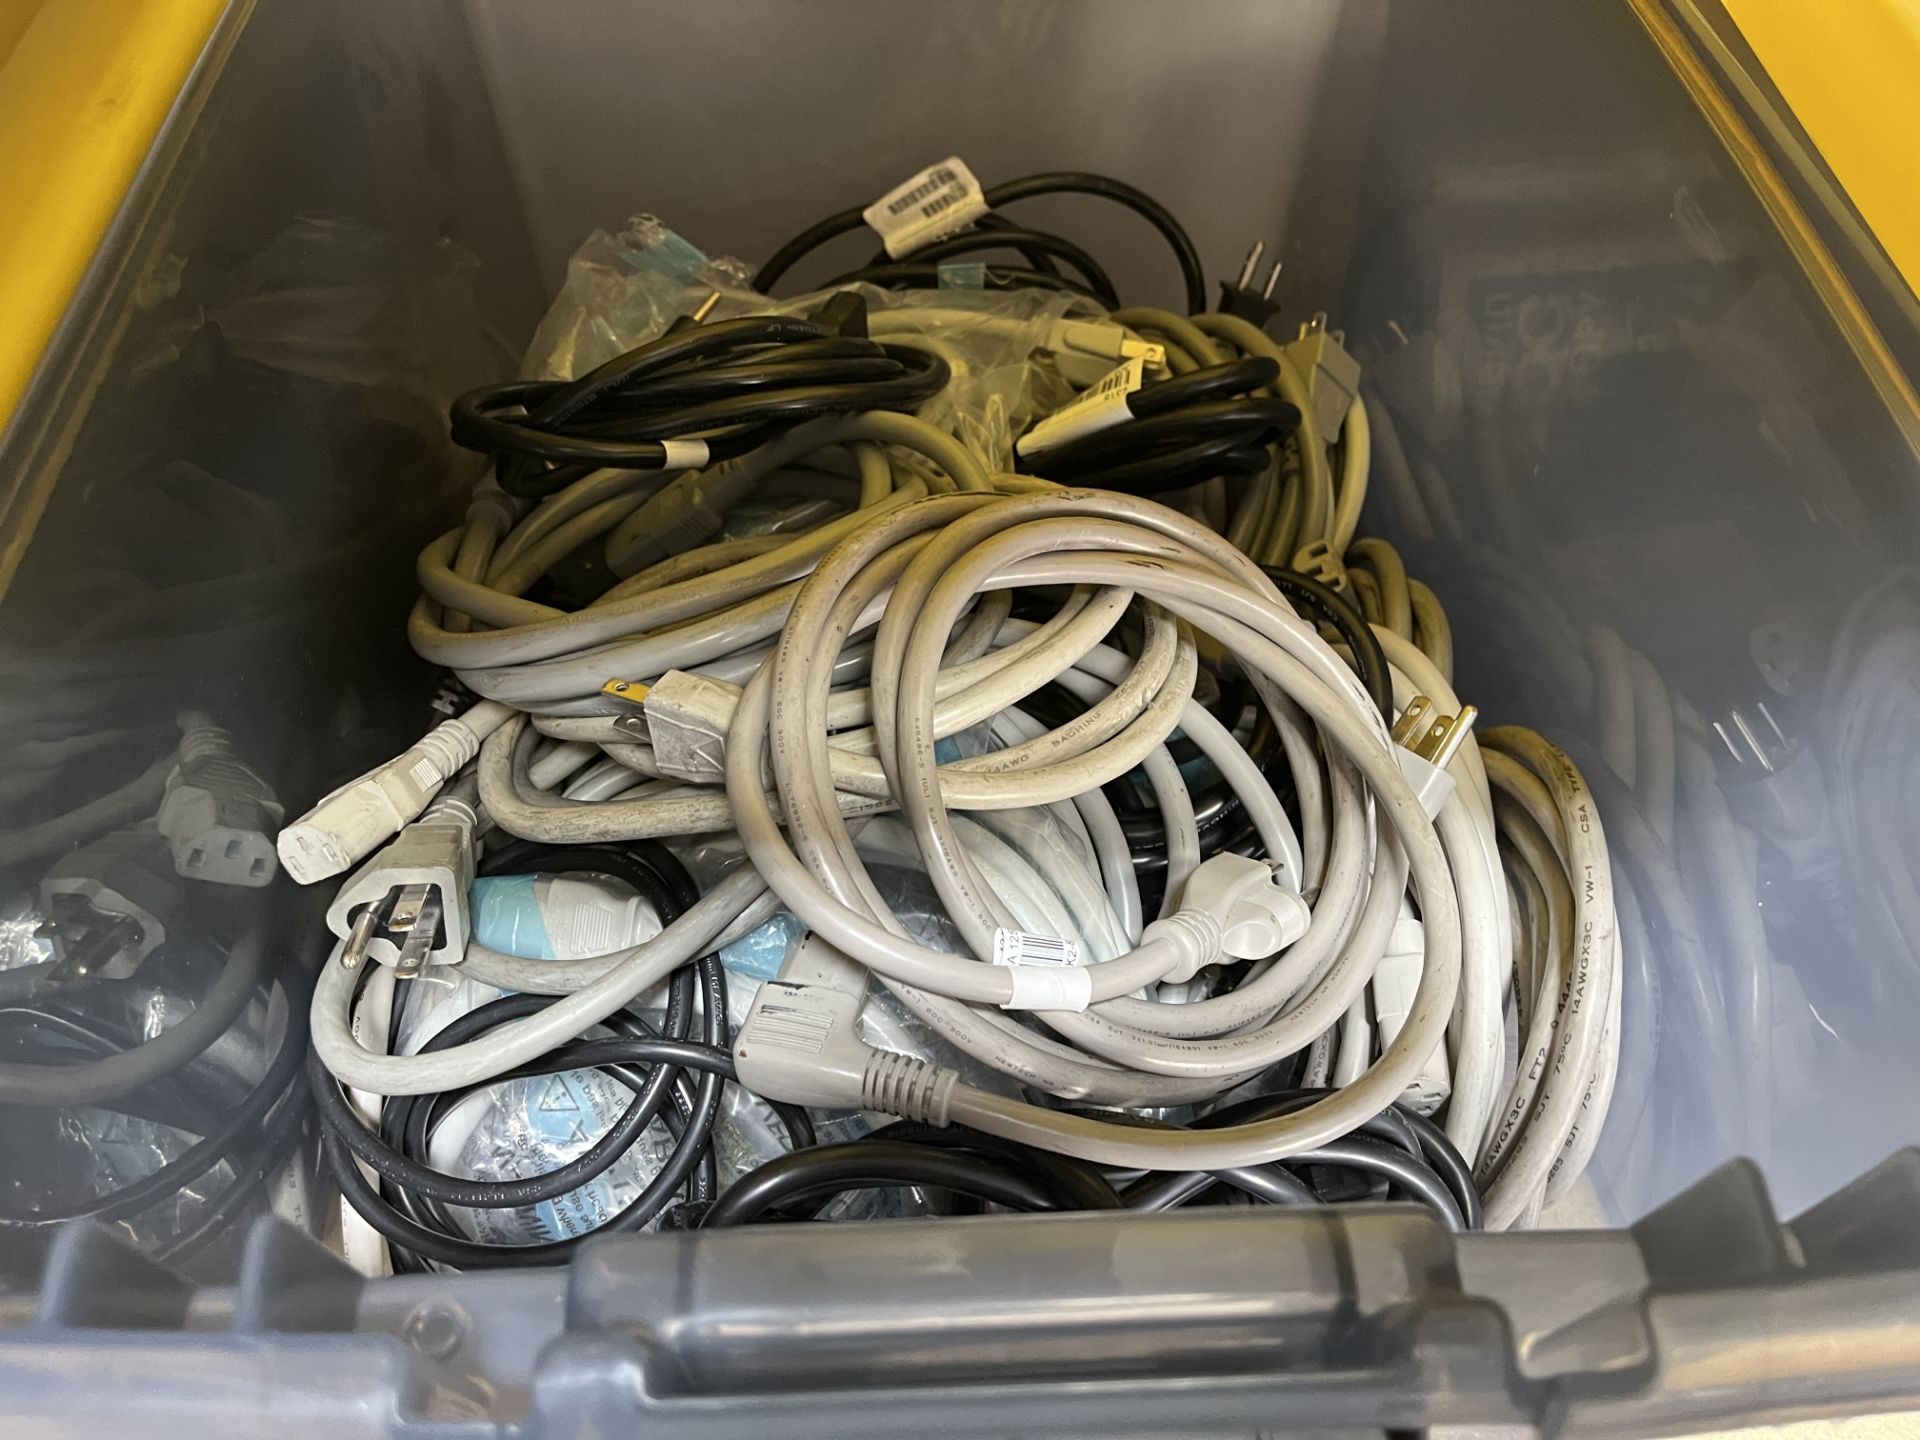 6 PLASTIC BINS OF CABLES, POWER CORDS, POWER FILTERS, ETC - Image 5 of 15